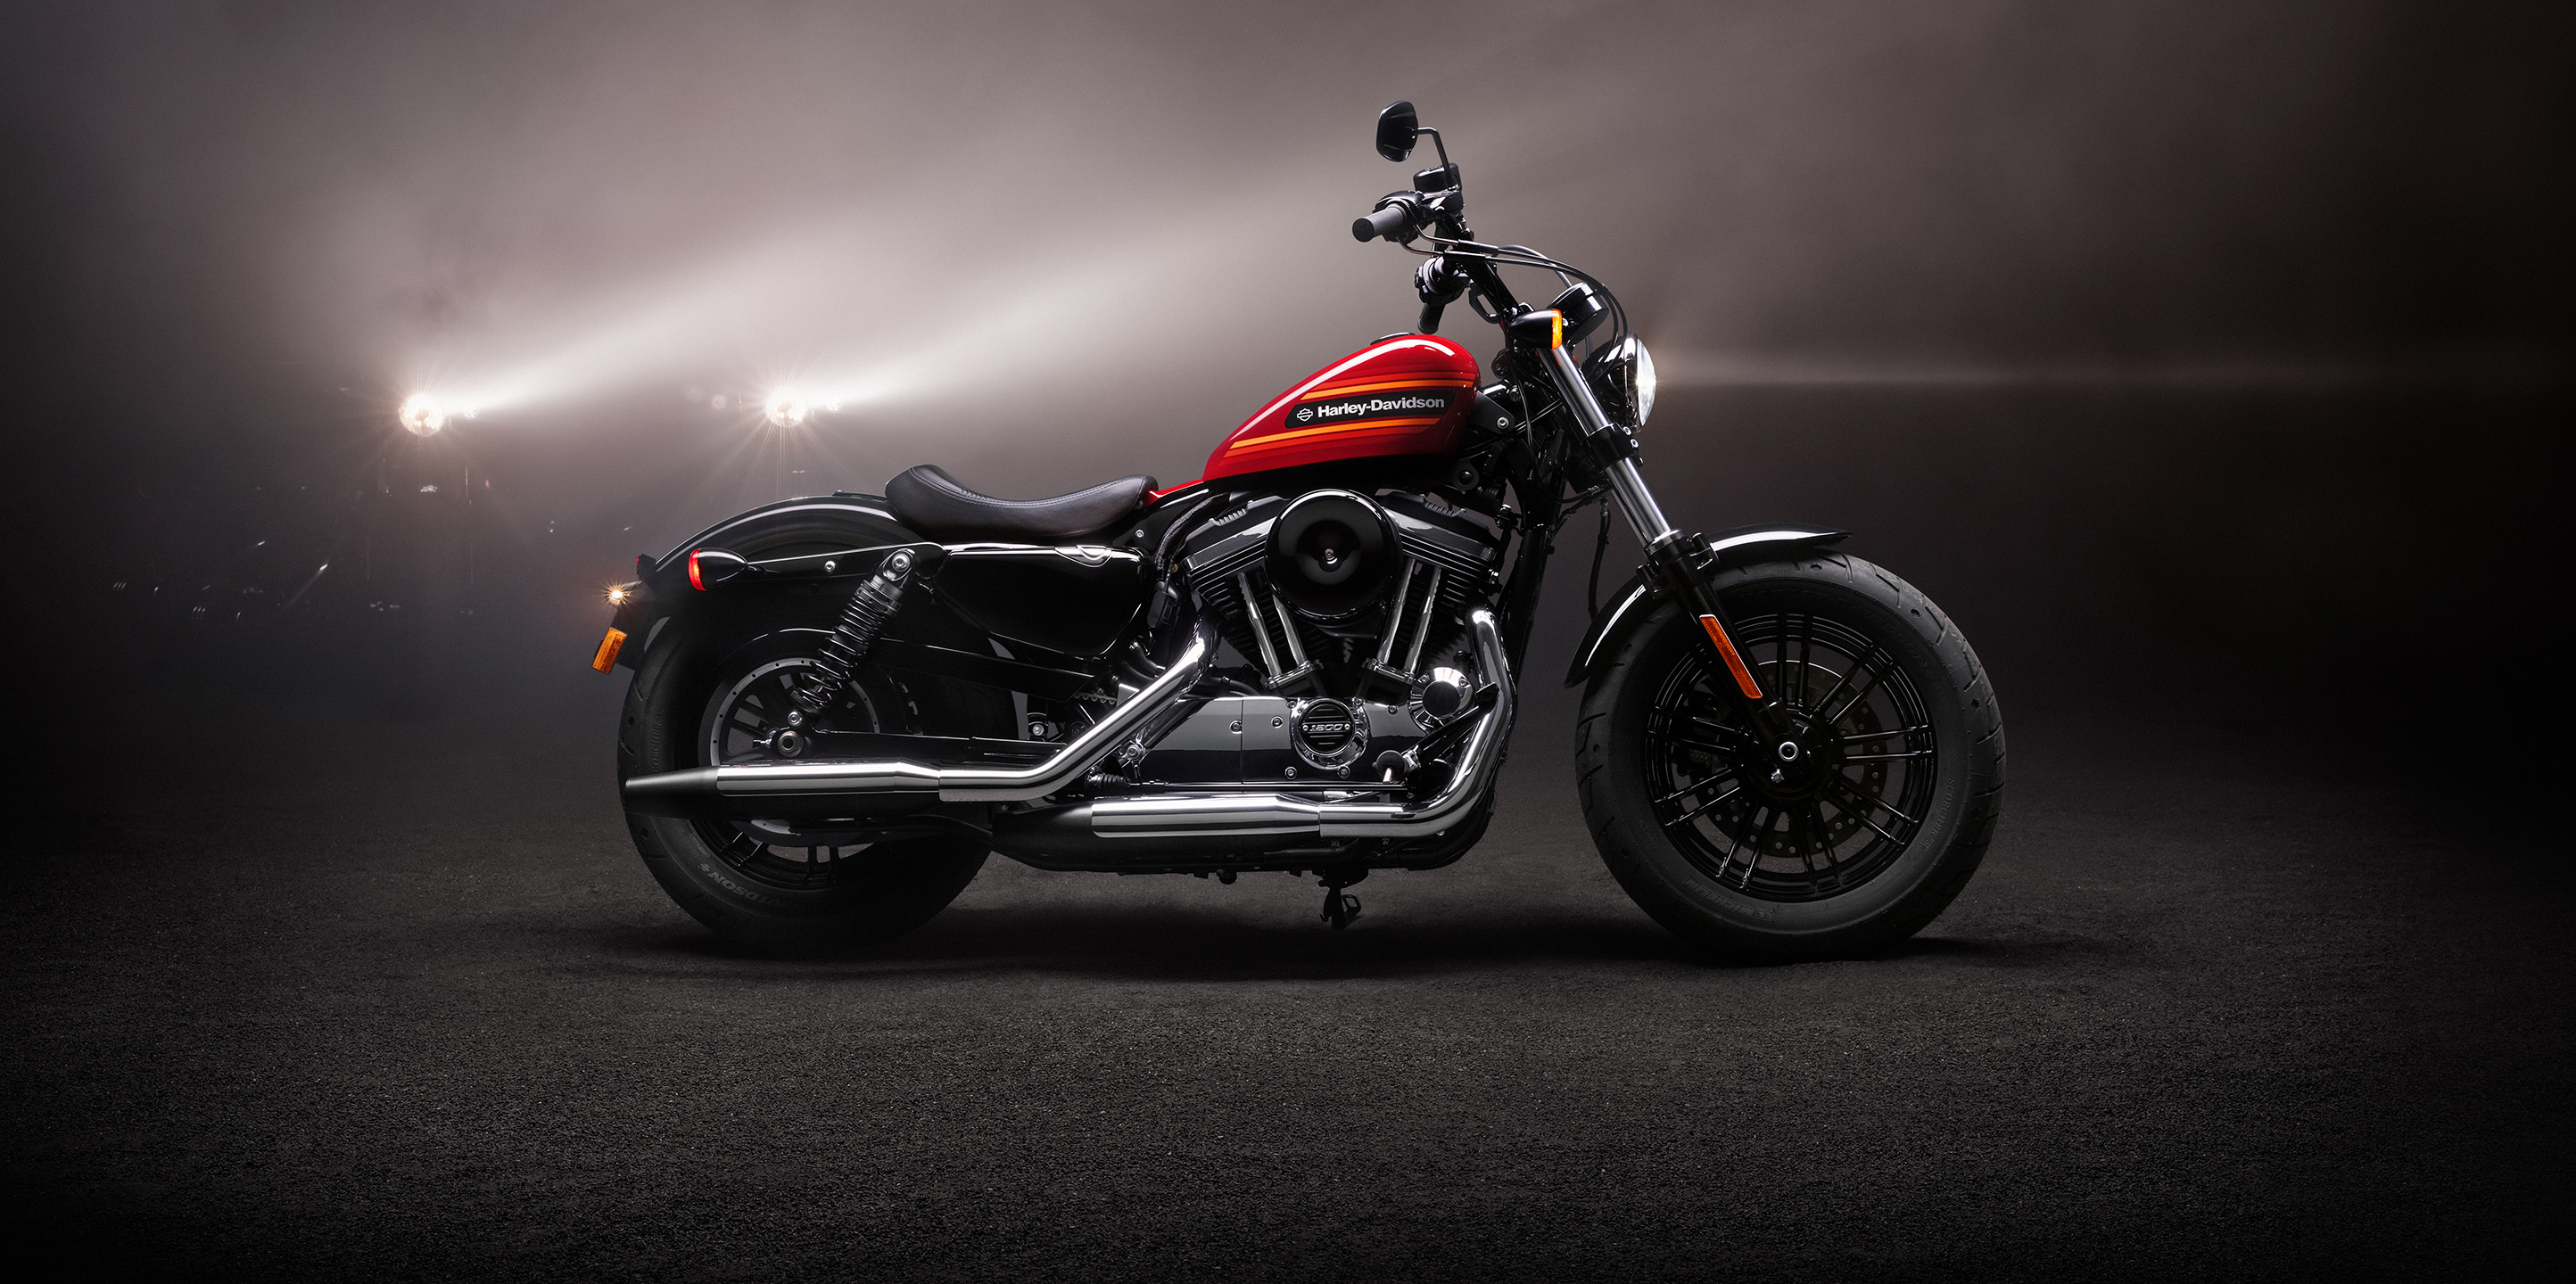 2020 Forty-Eight Special Motorcycle | Harley-Davidson India